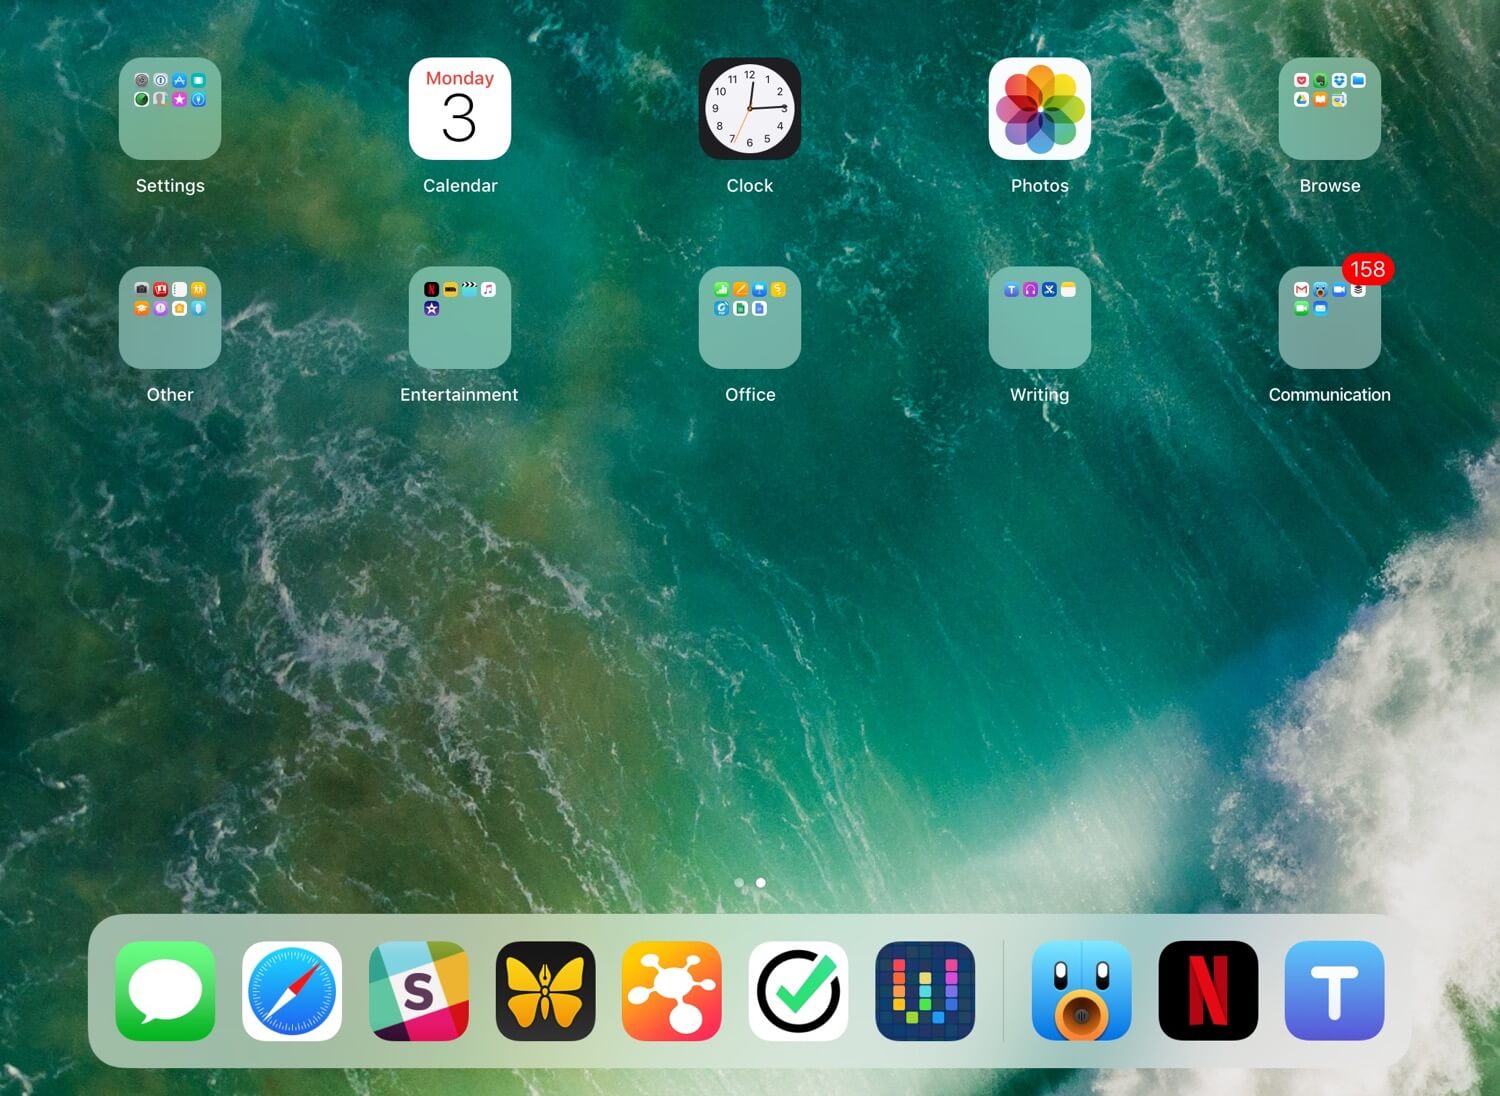 Minimal iPad for work - how setting up an iPad Pro can be an exercise in minimalism and focus